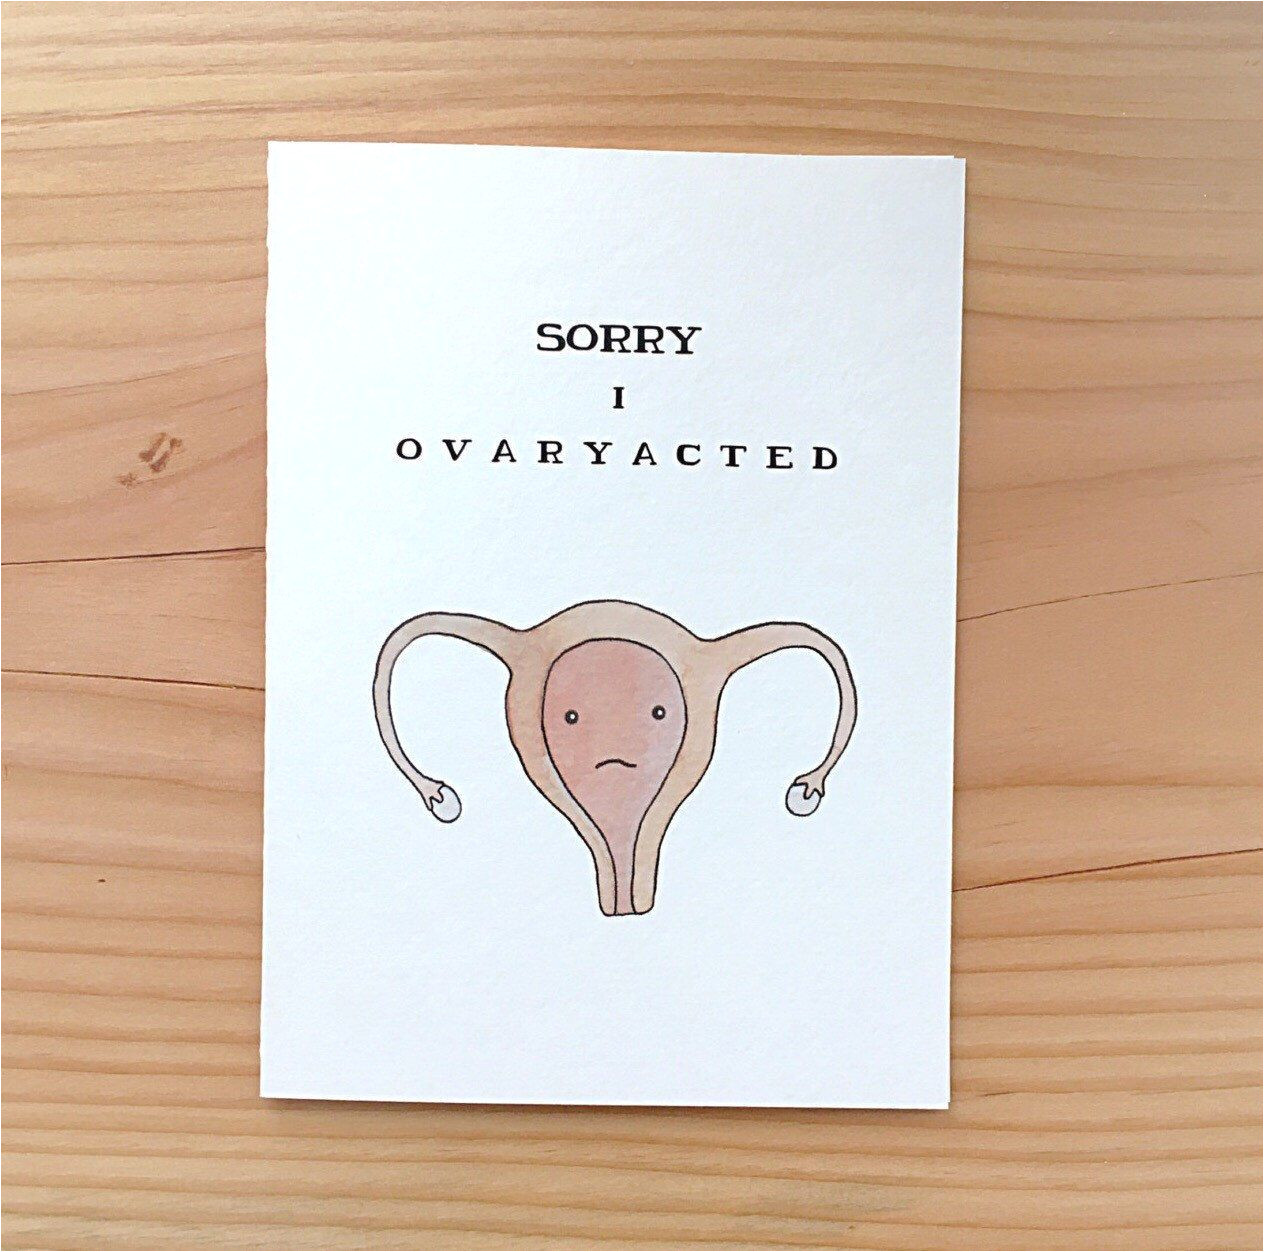 Happy Birthday You Old Goat Card Ovaryacted sorry Card Funny Card Funny sorry Card